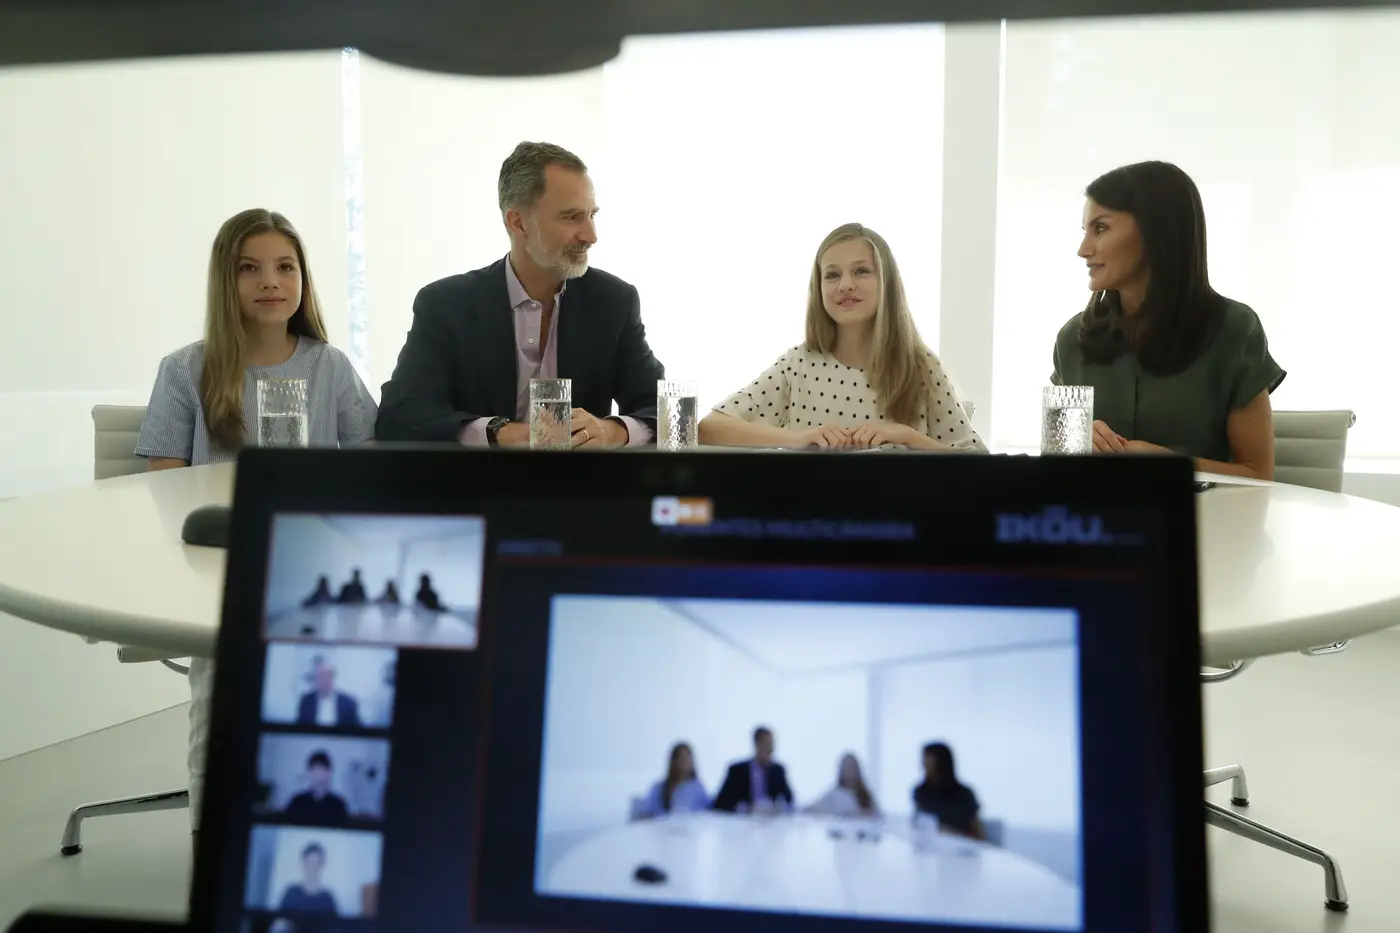 King Felipe, Queen Letizia, Princess Leonor and Infanta Sofía during the video conference with the FPdGi